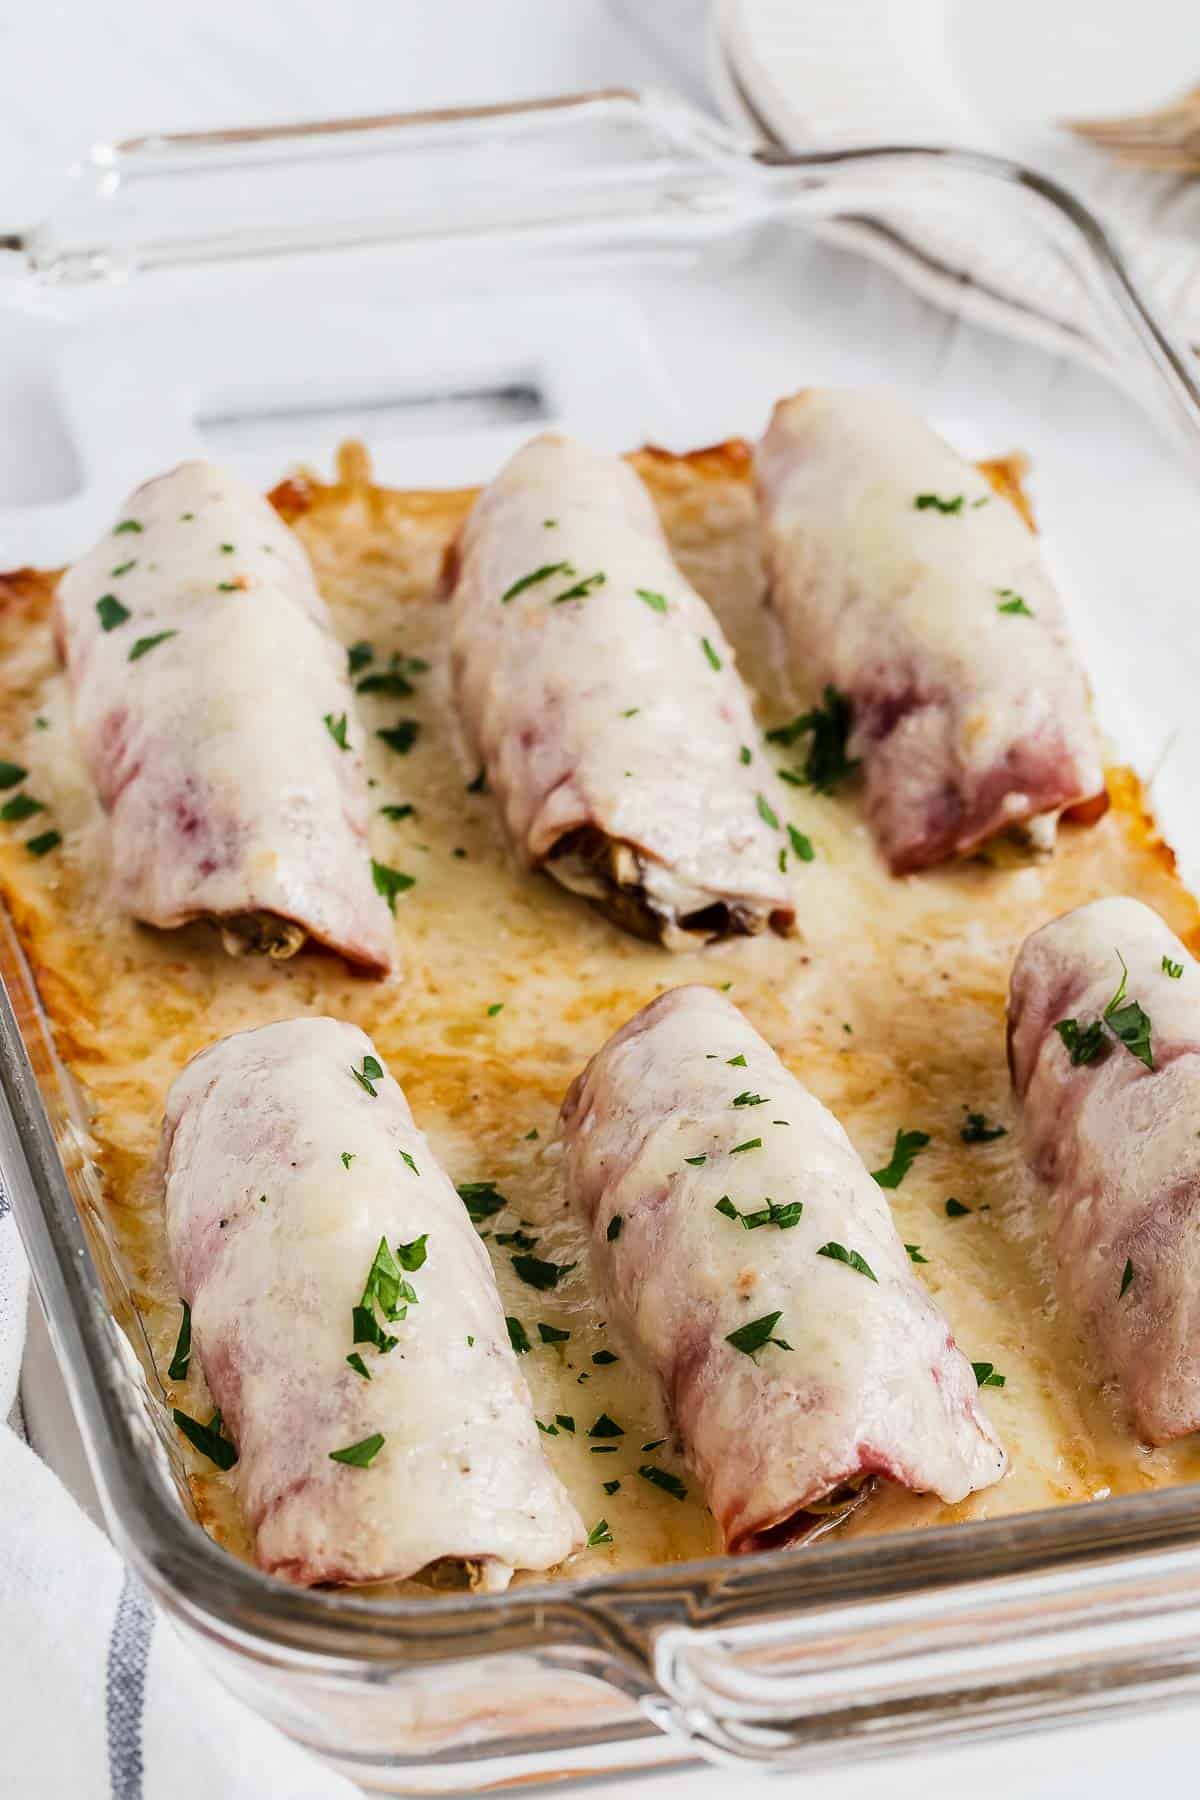 Baked endive in cheese sauce in baking pan.